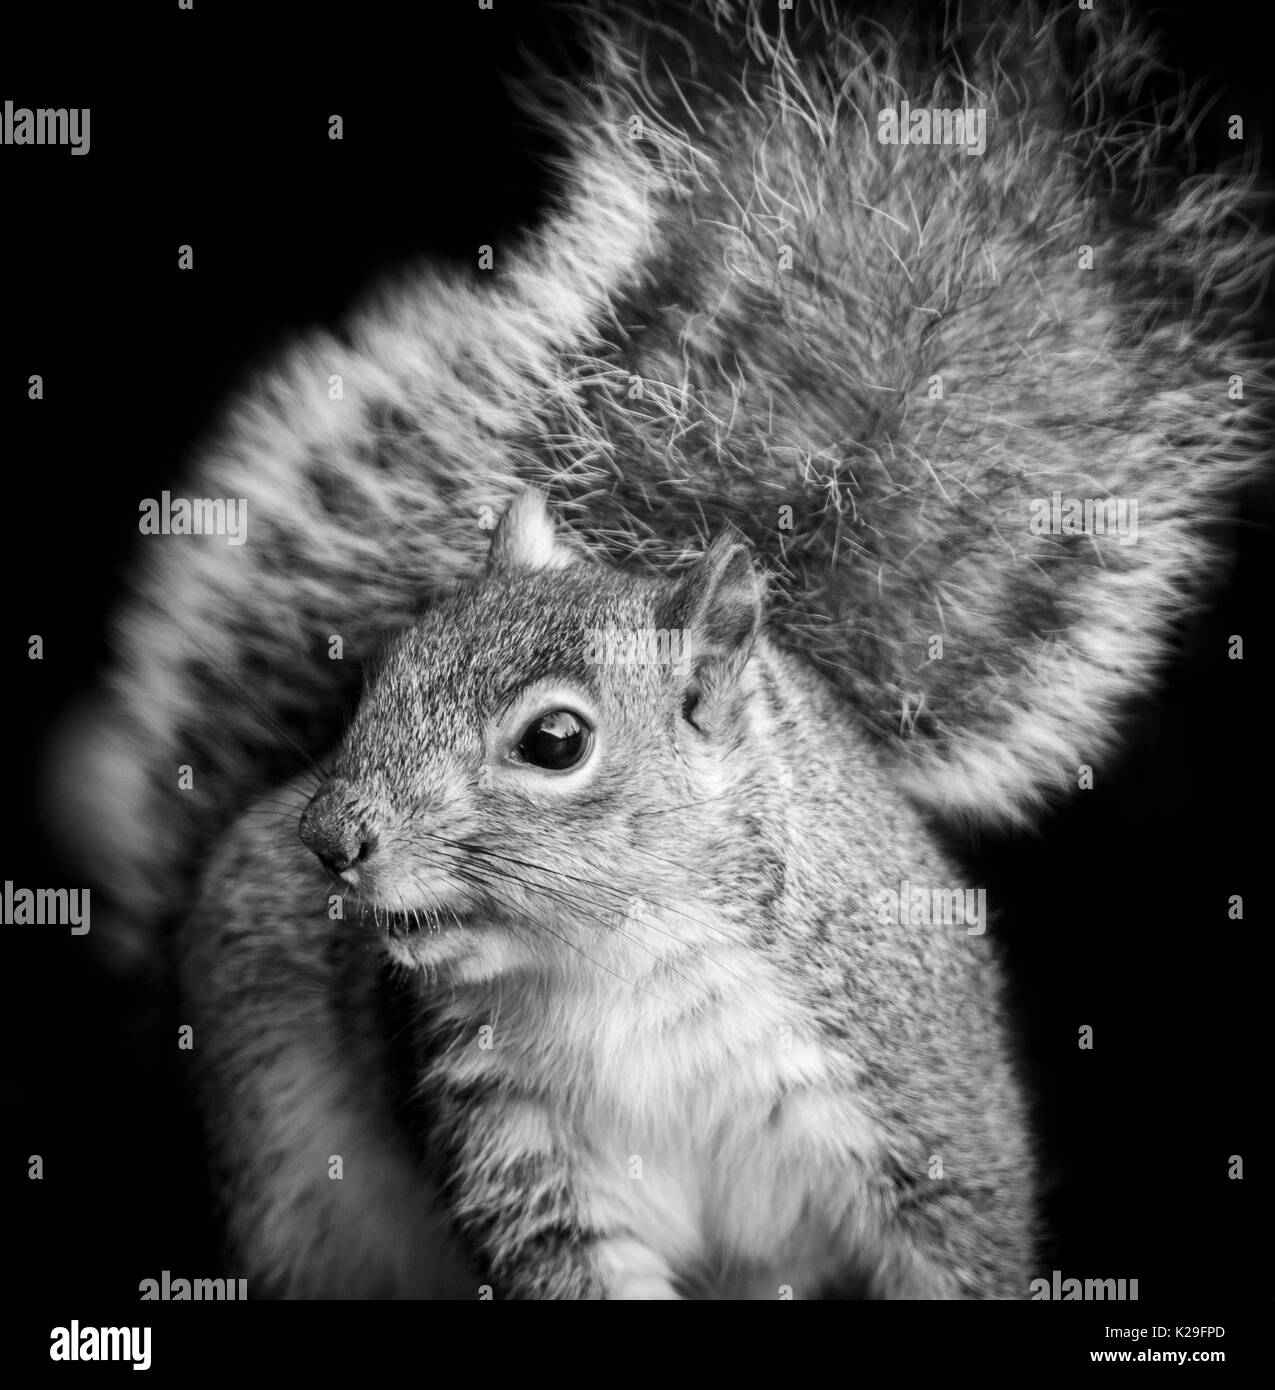 Close up of a grey squirrel, or American gray squirrel, Sciurus carolinensis, a cute rodent which has become a common garden pest in England, UK Stock Photo